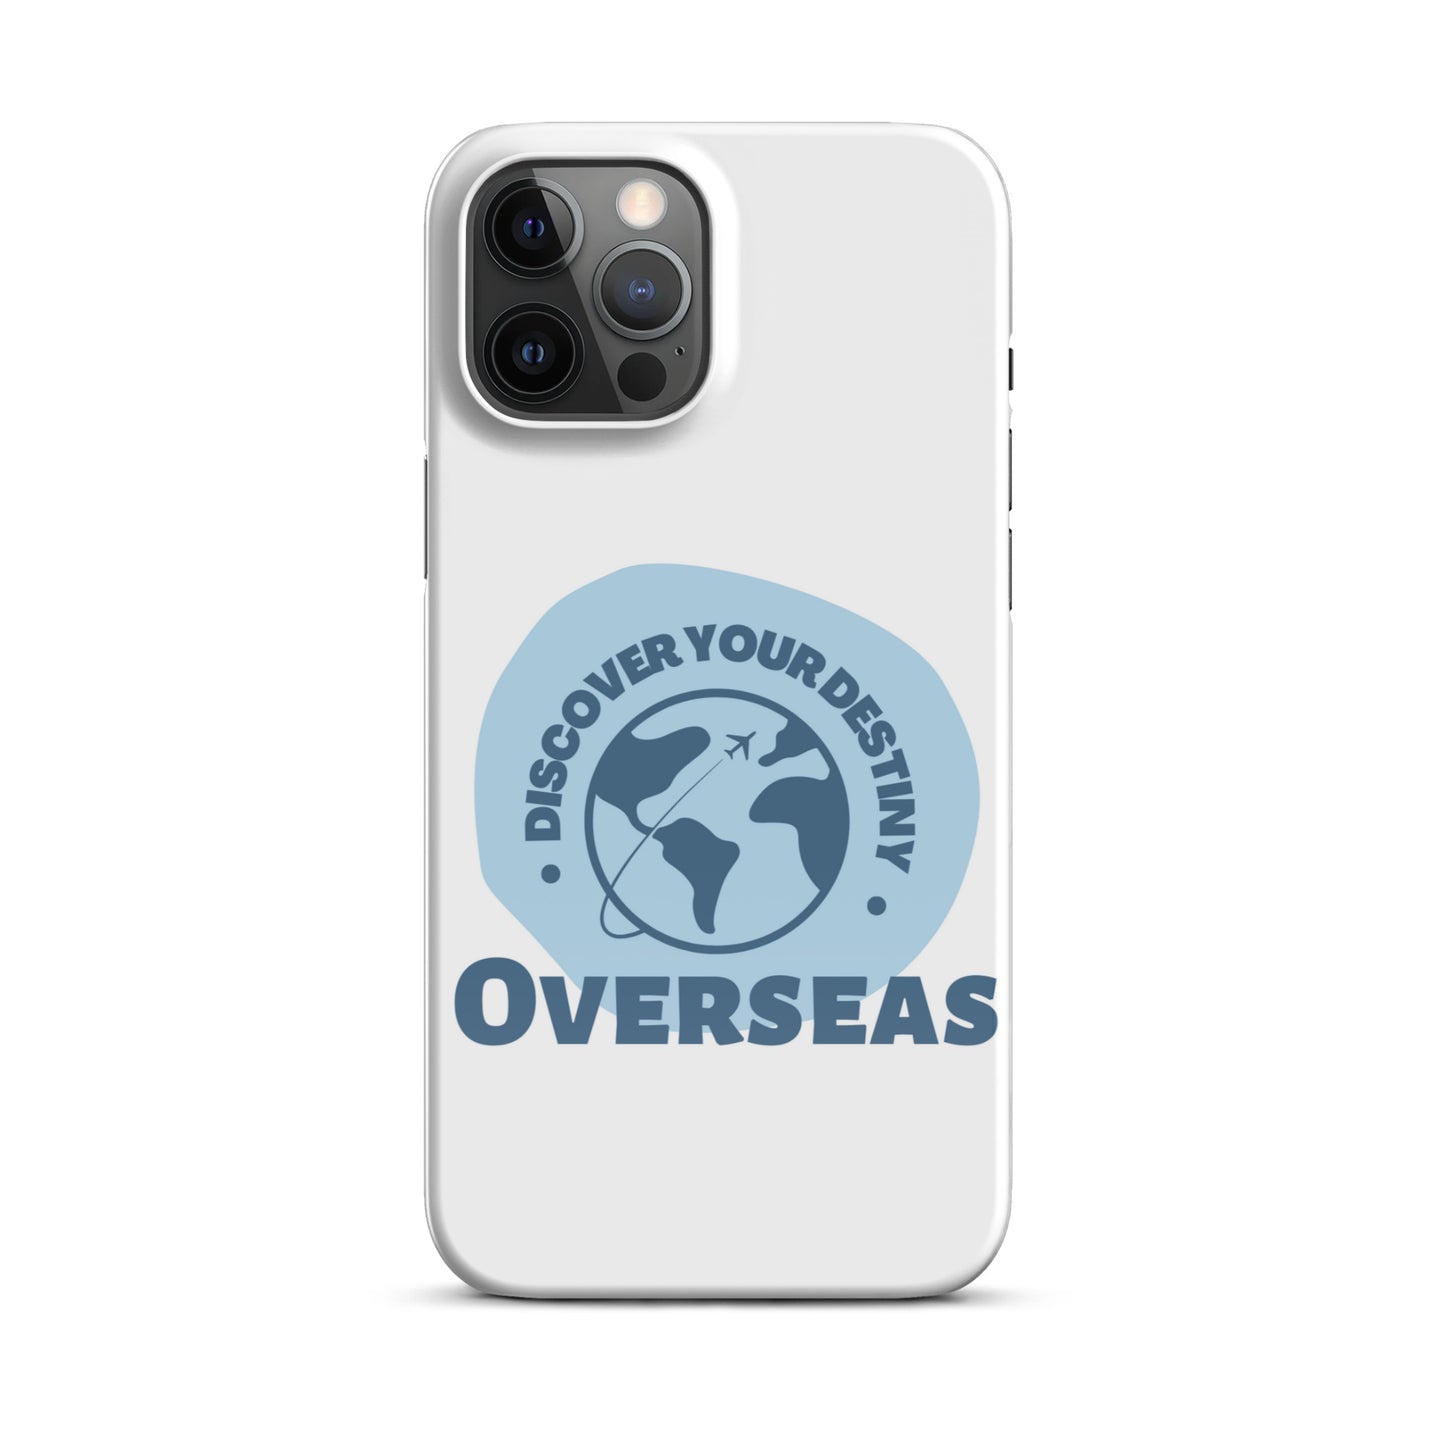 Snap case for iPhone® Discover Your Destiny Overseas